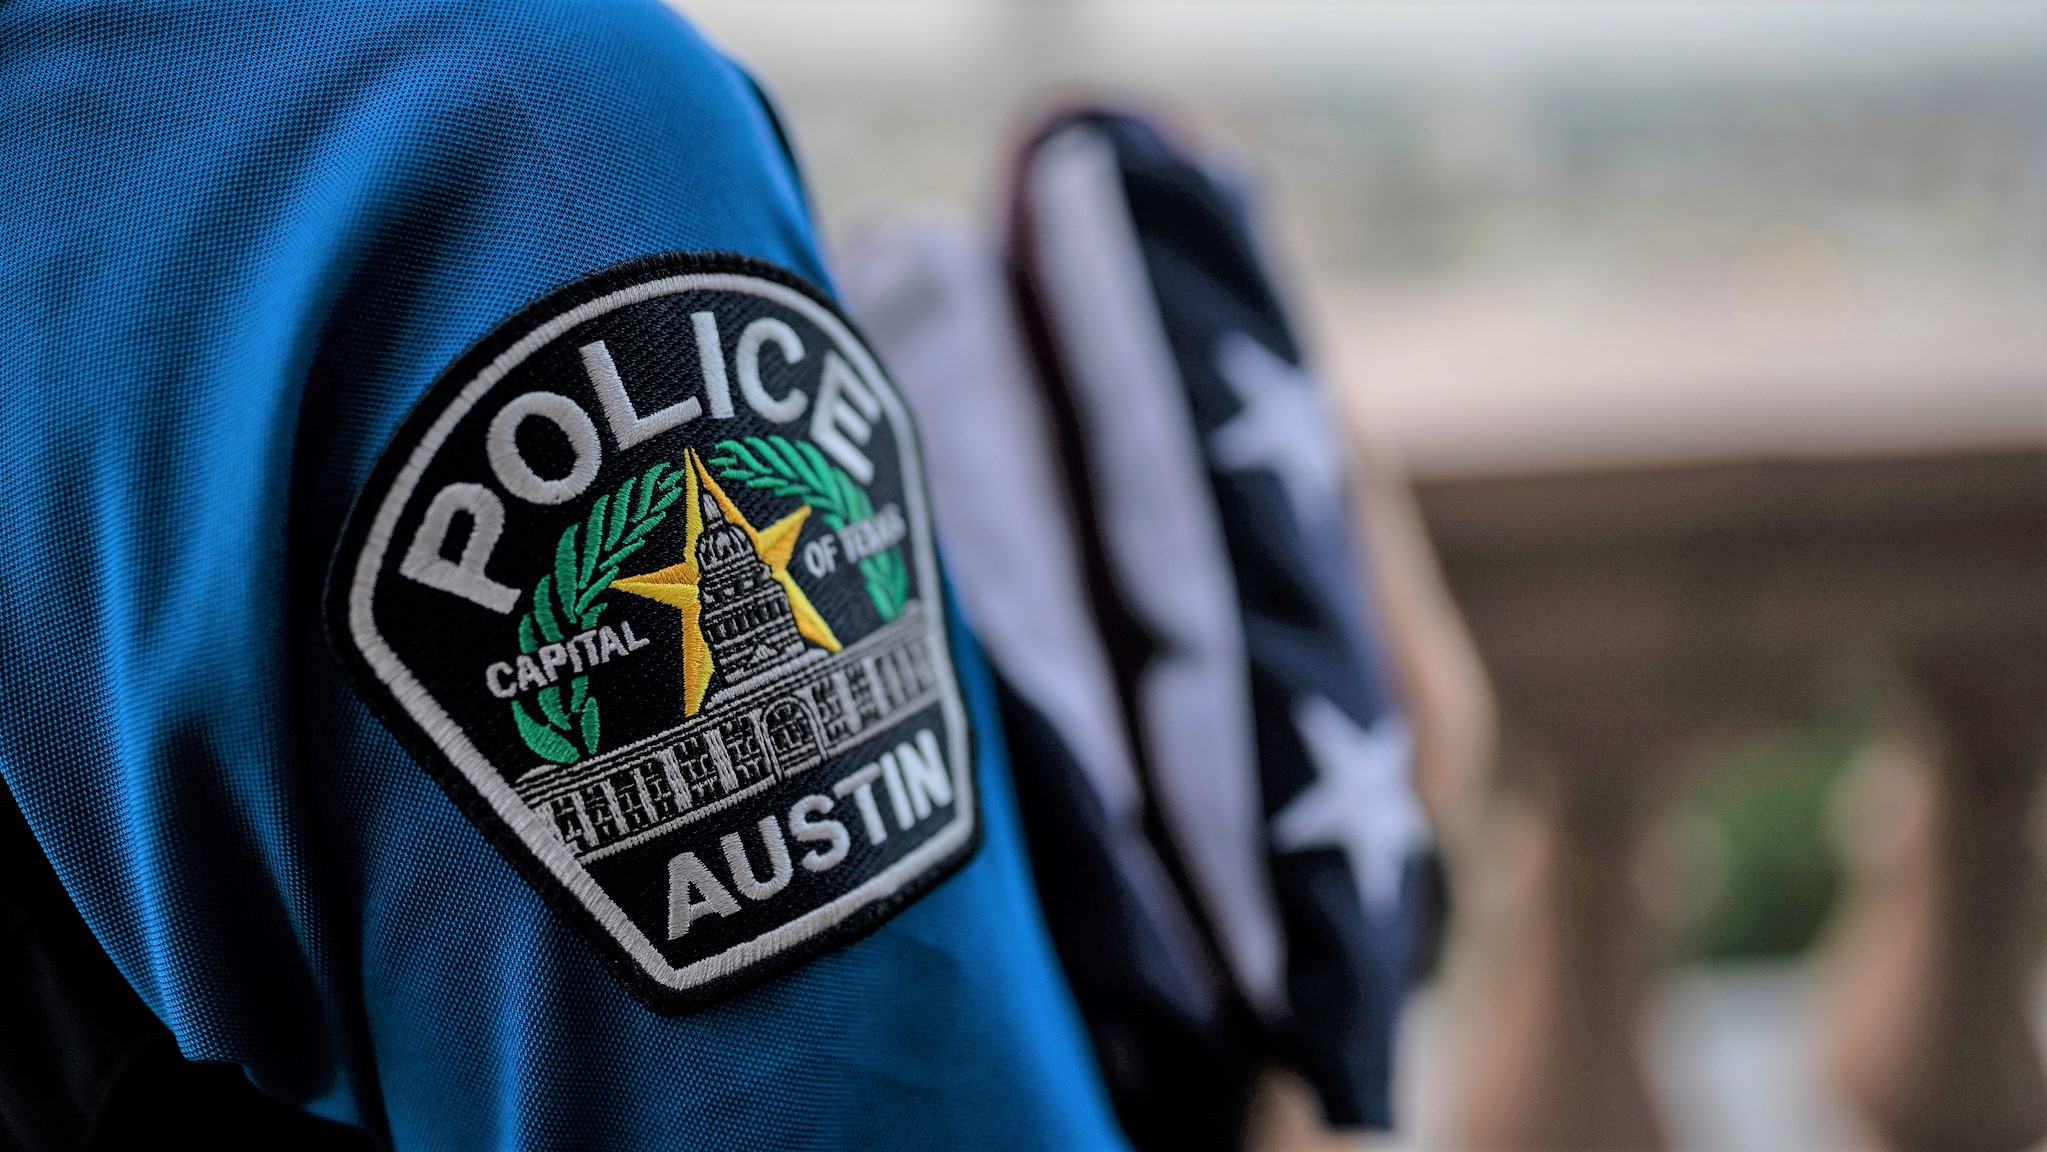 Image of an Austin Police Department's patch on the shoulder of their shirt